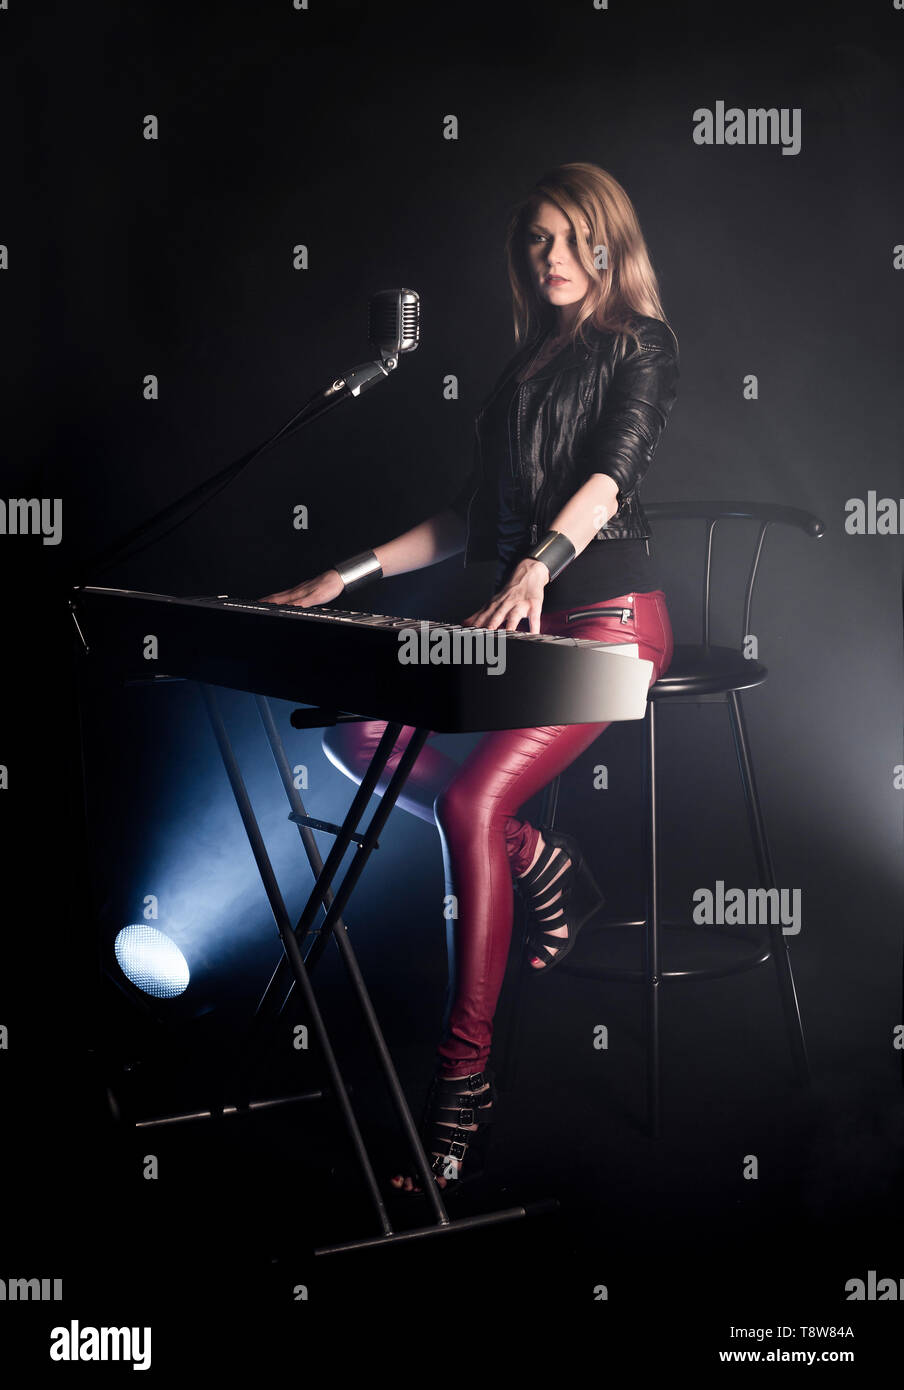 Blonde girl musician pianist plays perform on white digital piano, sits on chair, sings into retro microphone. Woman teacher shows how to play music Stock Photo